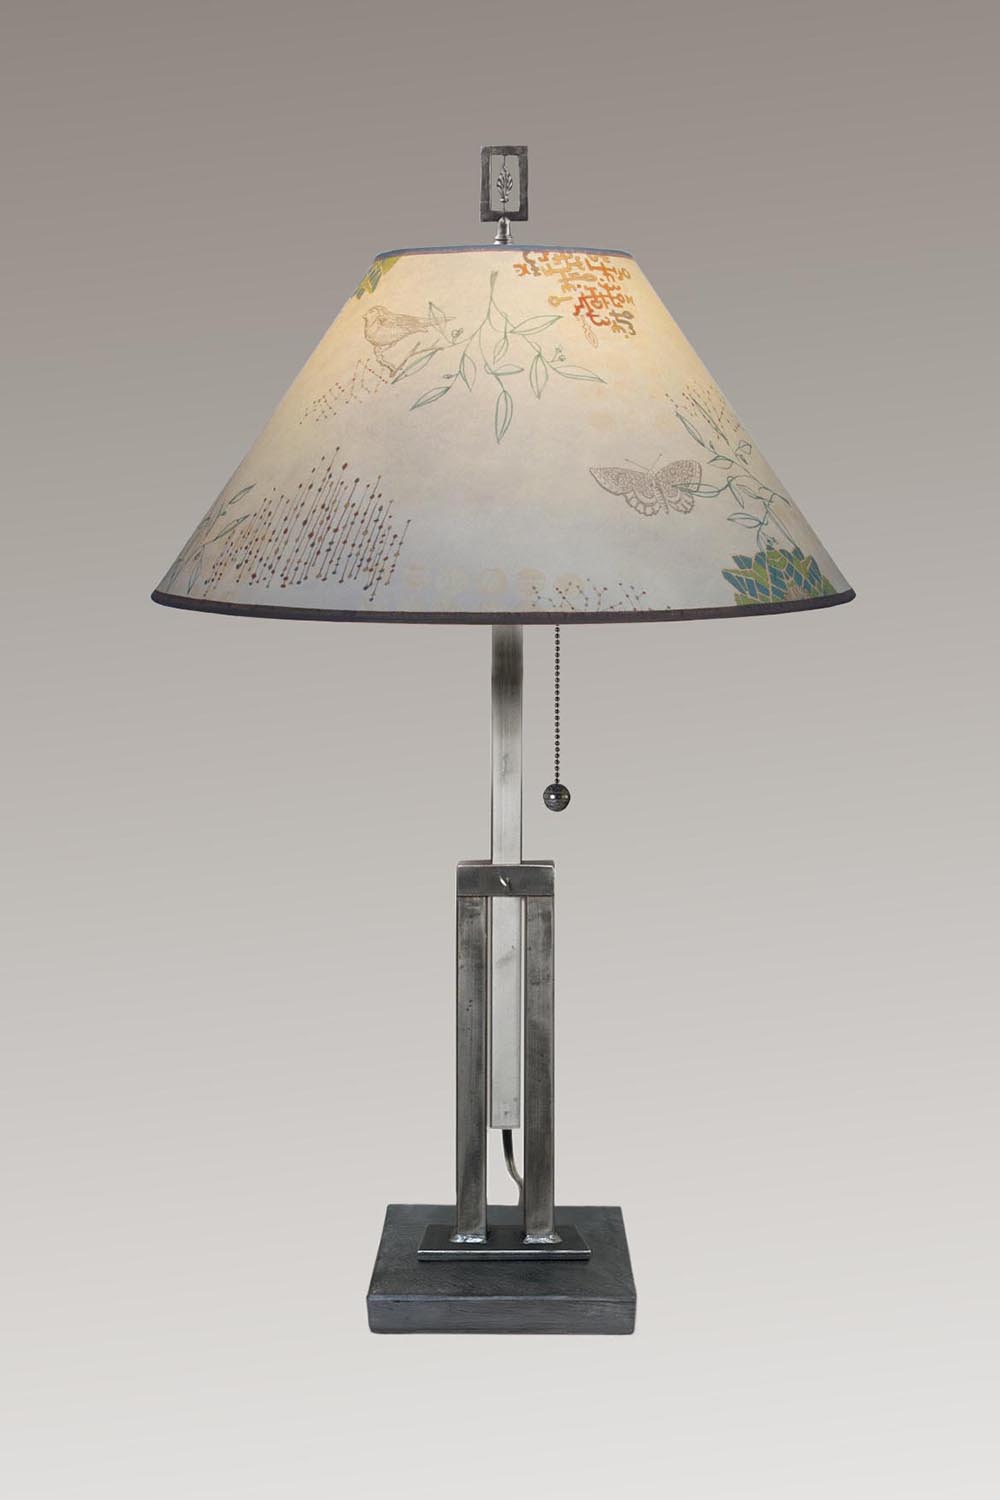 Janna Ugone &amp; Co Table Lamps Adjustable-Height Steel Table Lamp with Large Conical Shade in Ecru Journey